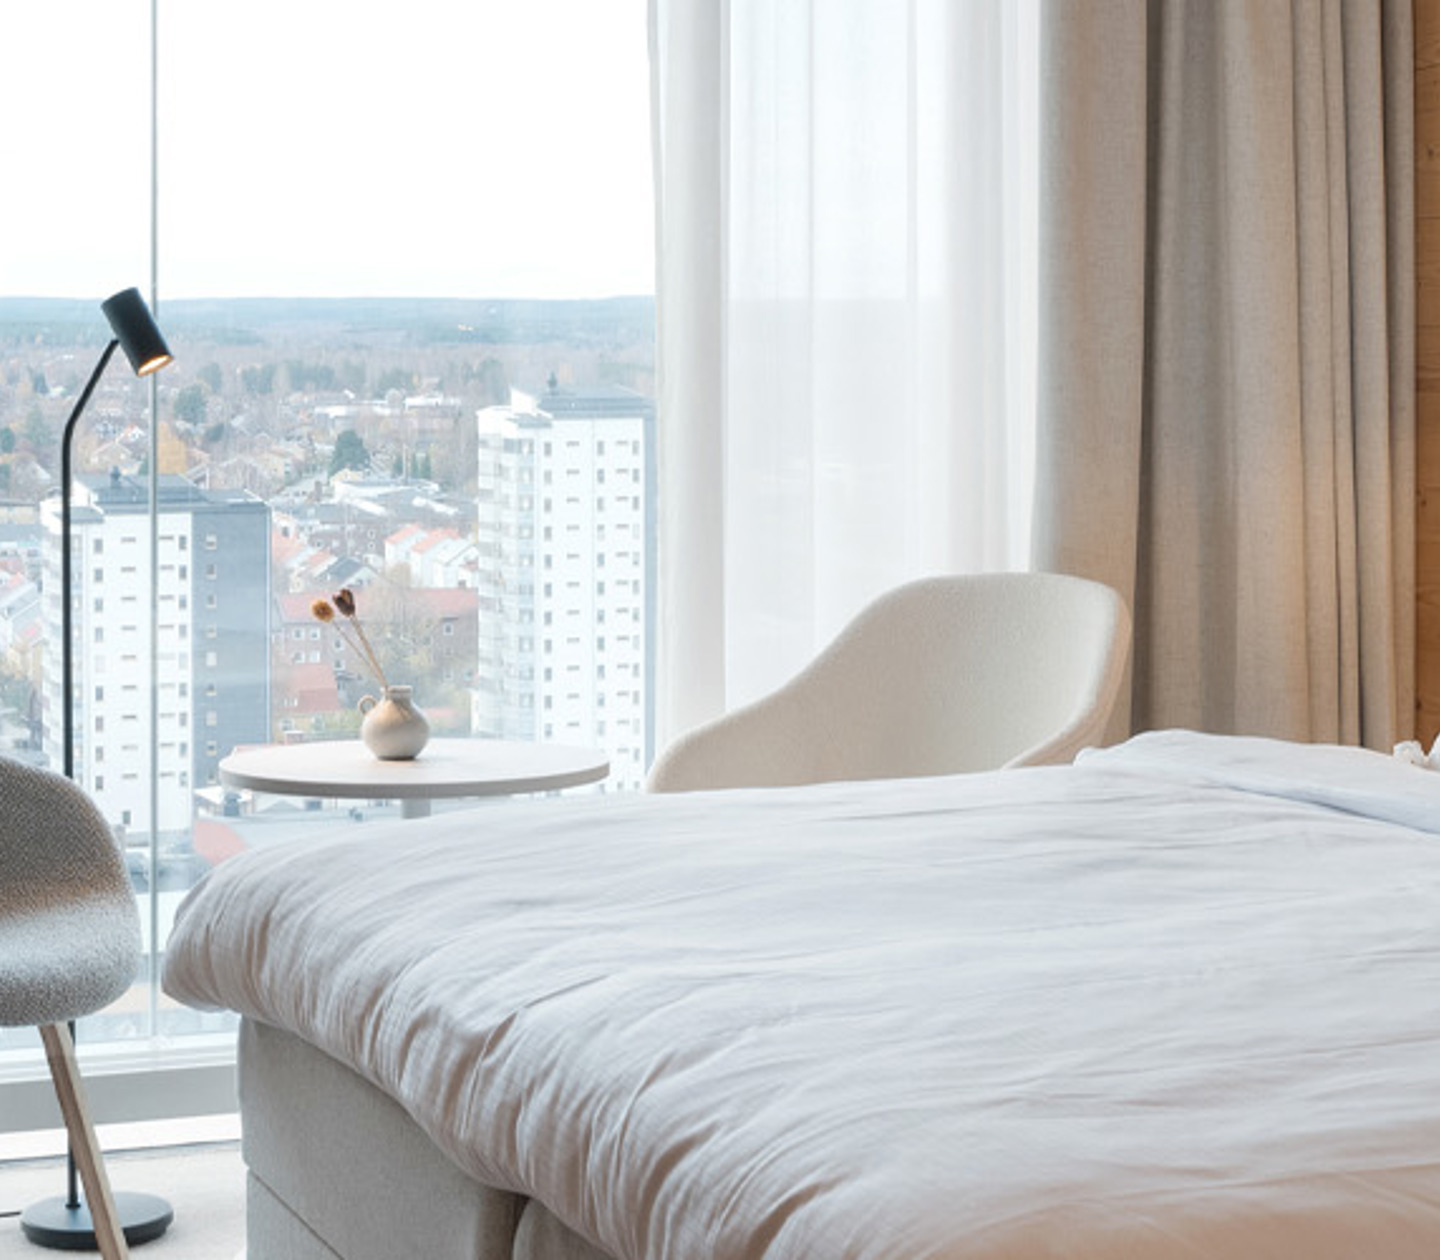 Cozy hotel room with double bed, TV, chairs and large windows overlooking Skellefteå